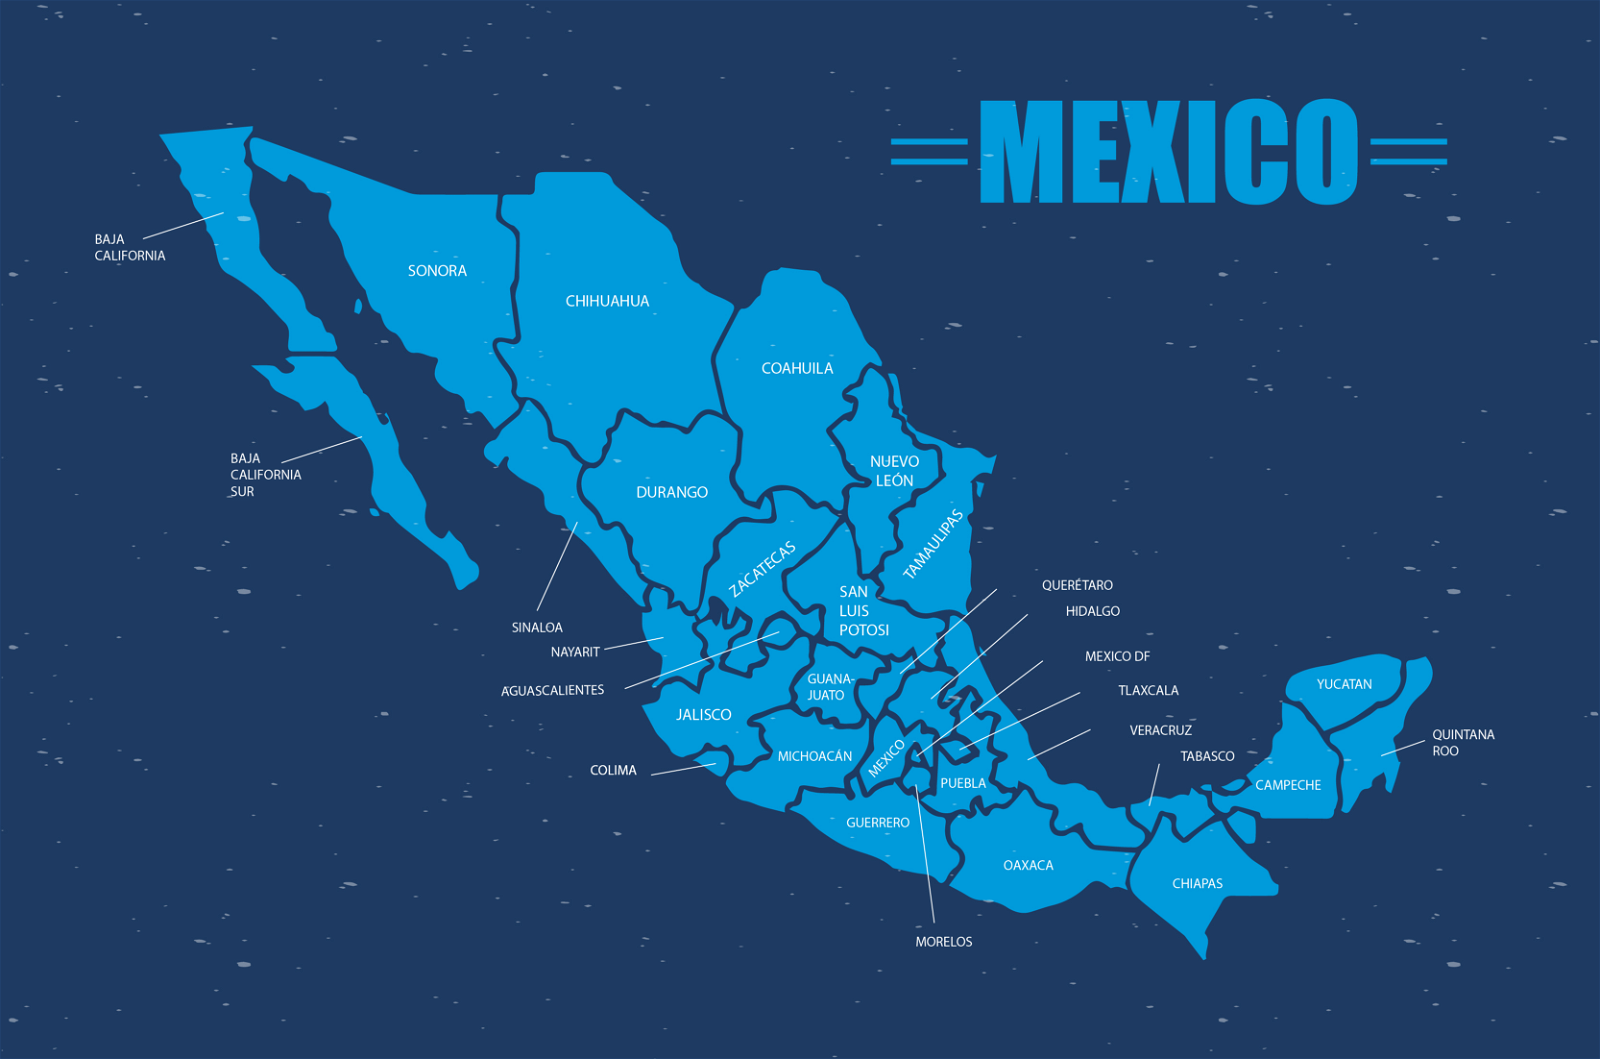 mexico-map-powerpoint-presentation-slides-ppt-template-lupon-gov-ph